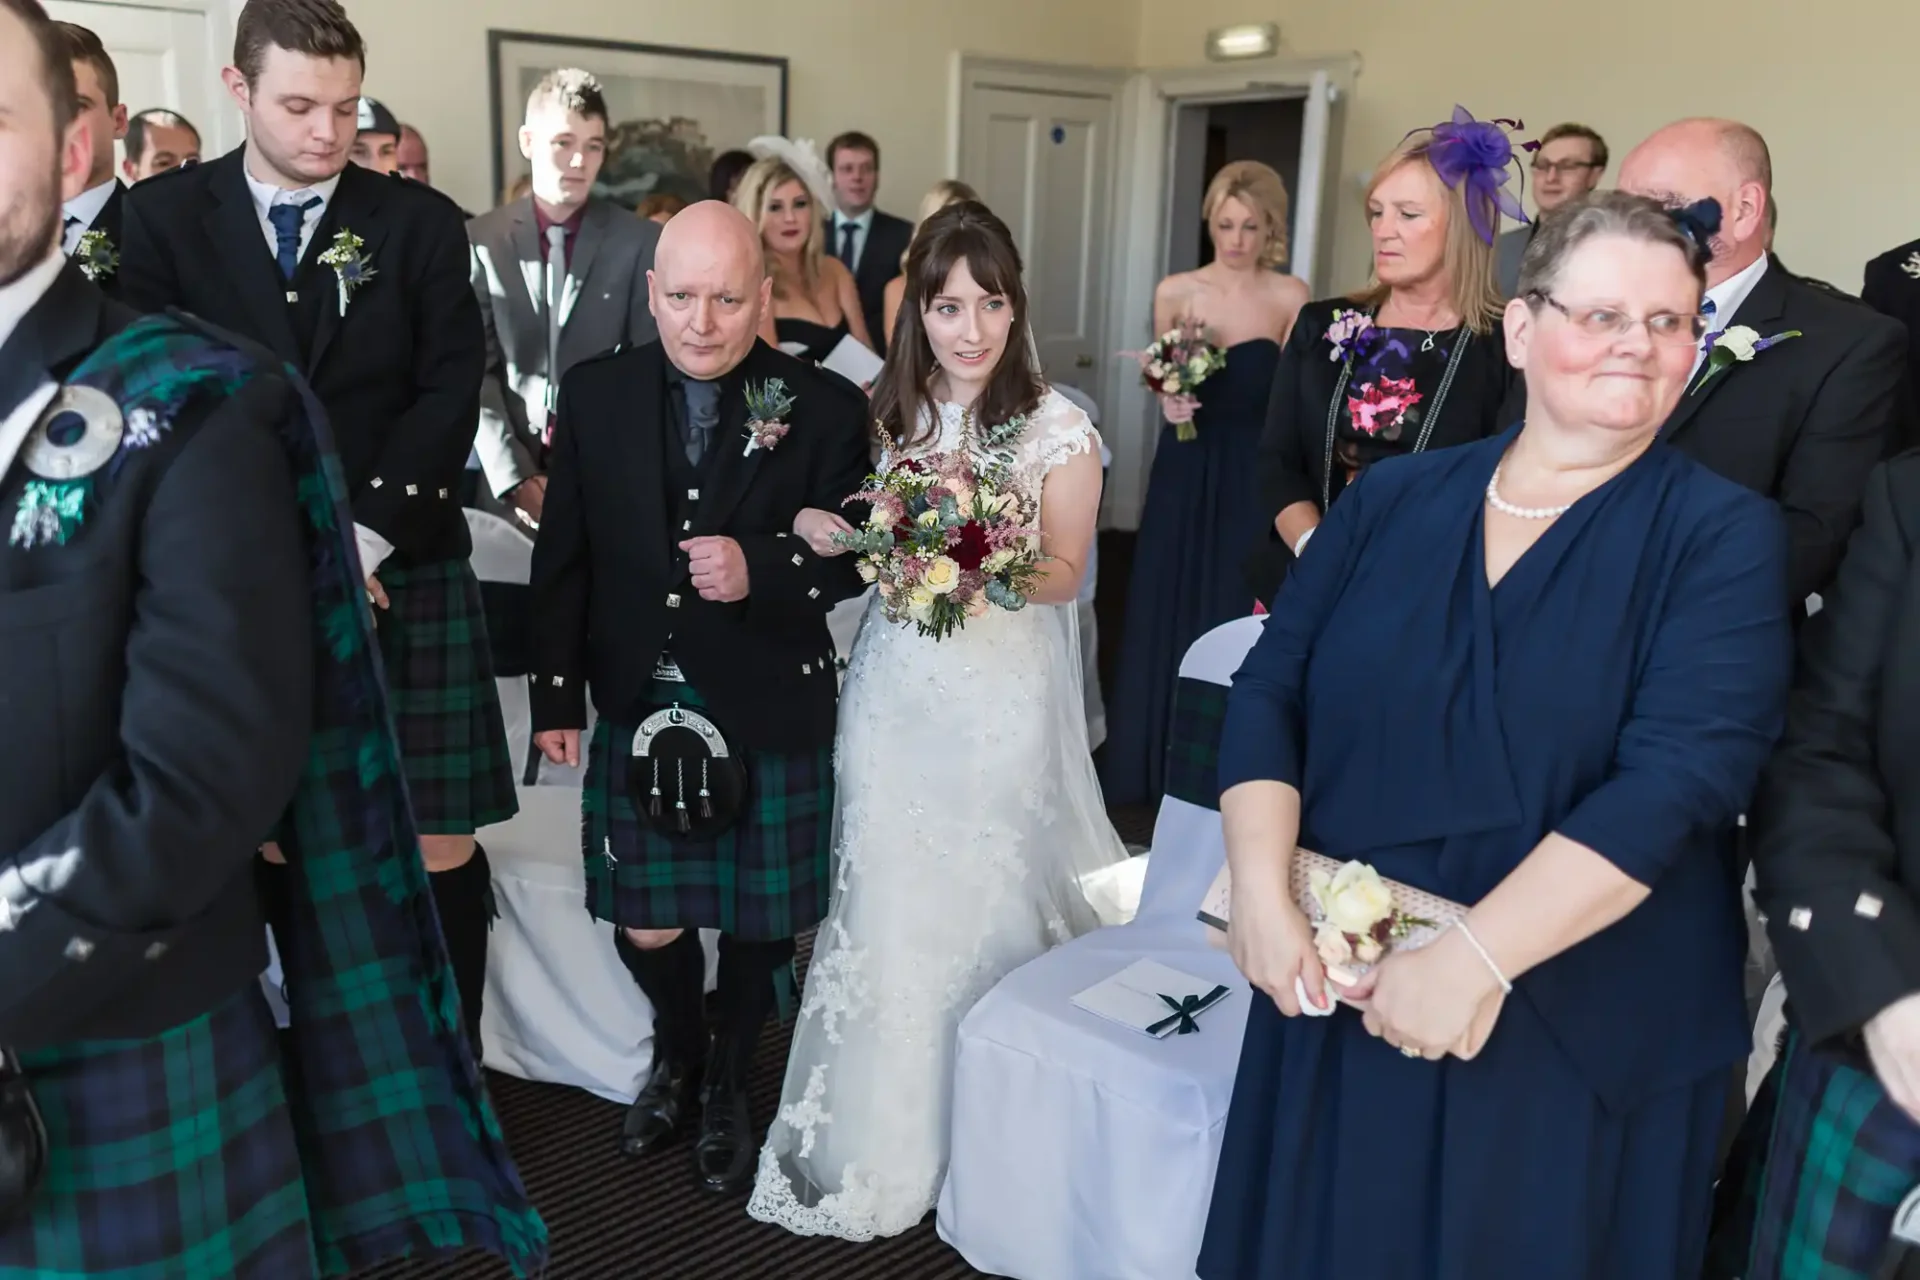 A bride walks down the aisle holding a bouquet, accompanied by her father in a tartan kilt, surrounded by guests in formal attire, at a wedding ceremony.